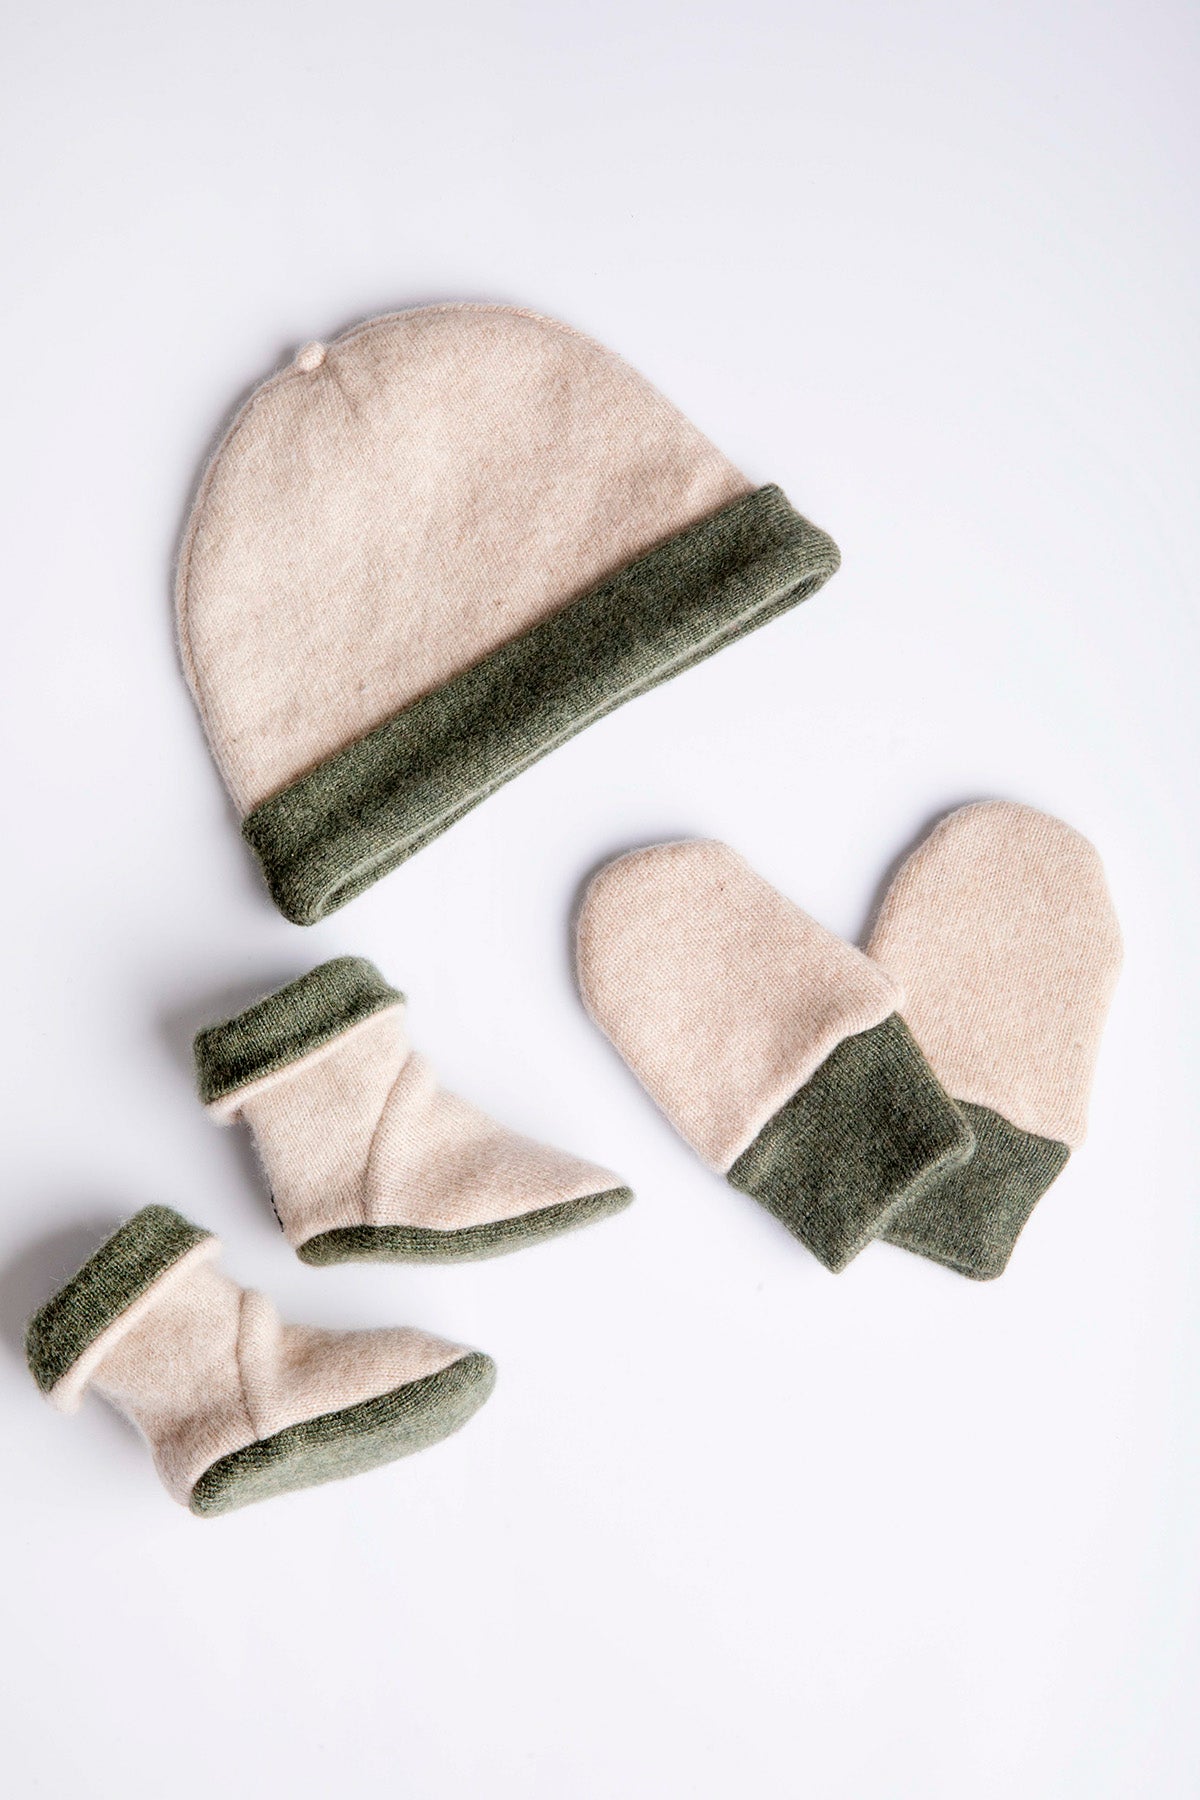 Green Baby Set - Mittens, Booties and Hat